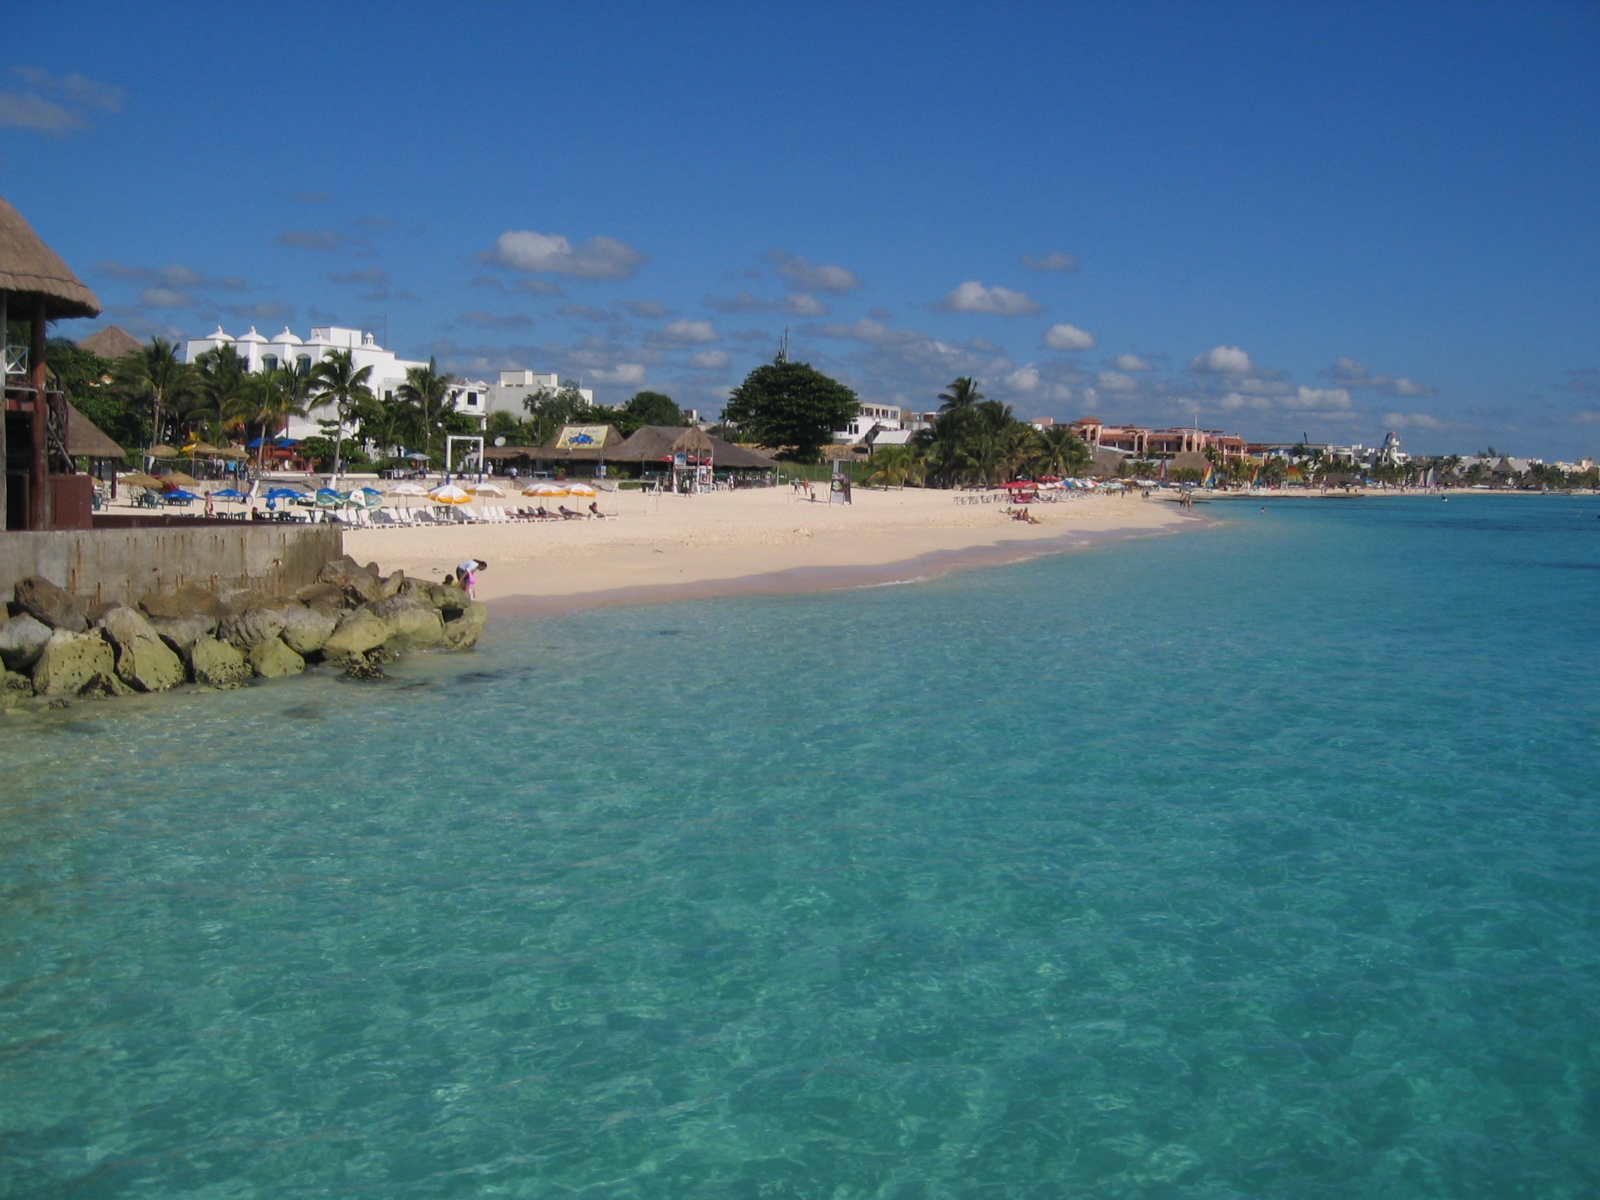 Our beautiful beach in the Grand Cayman's
